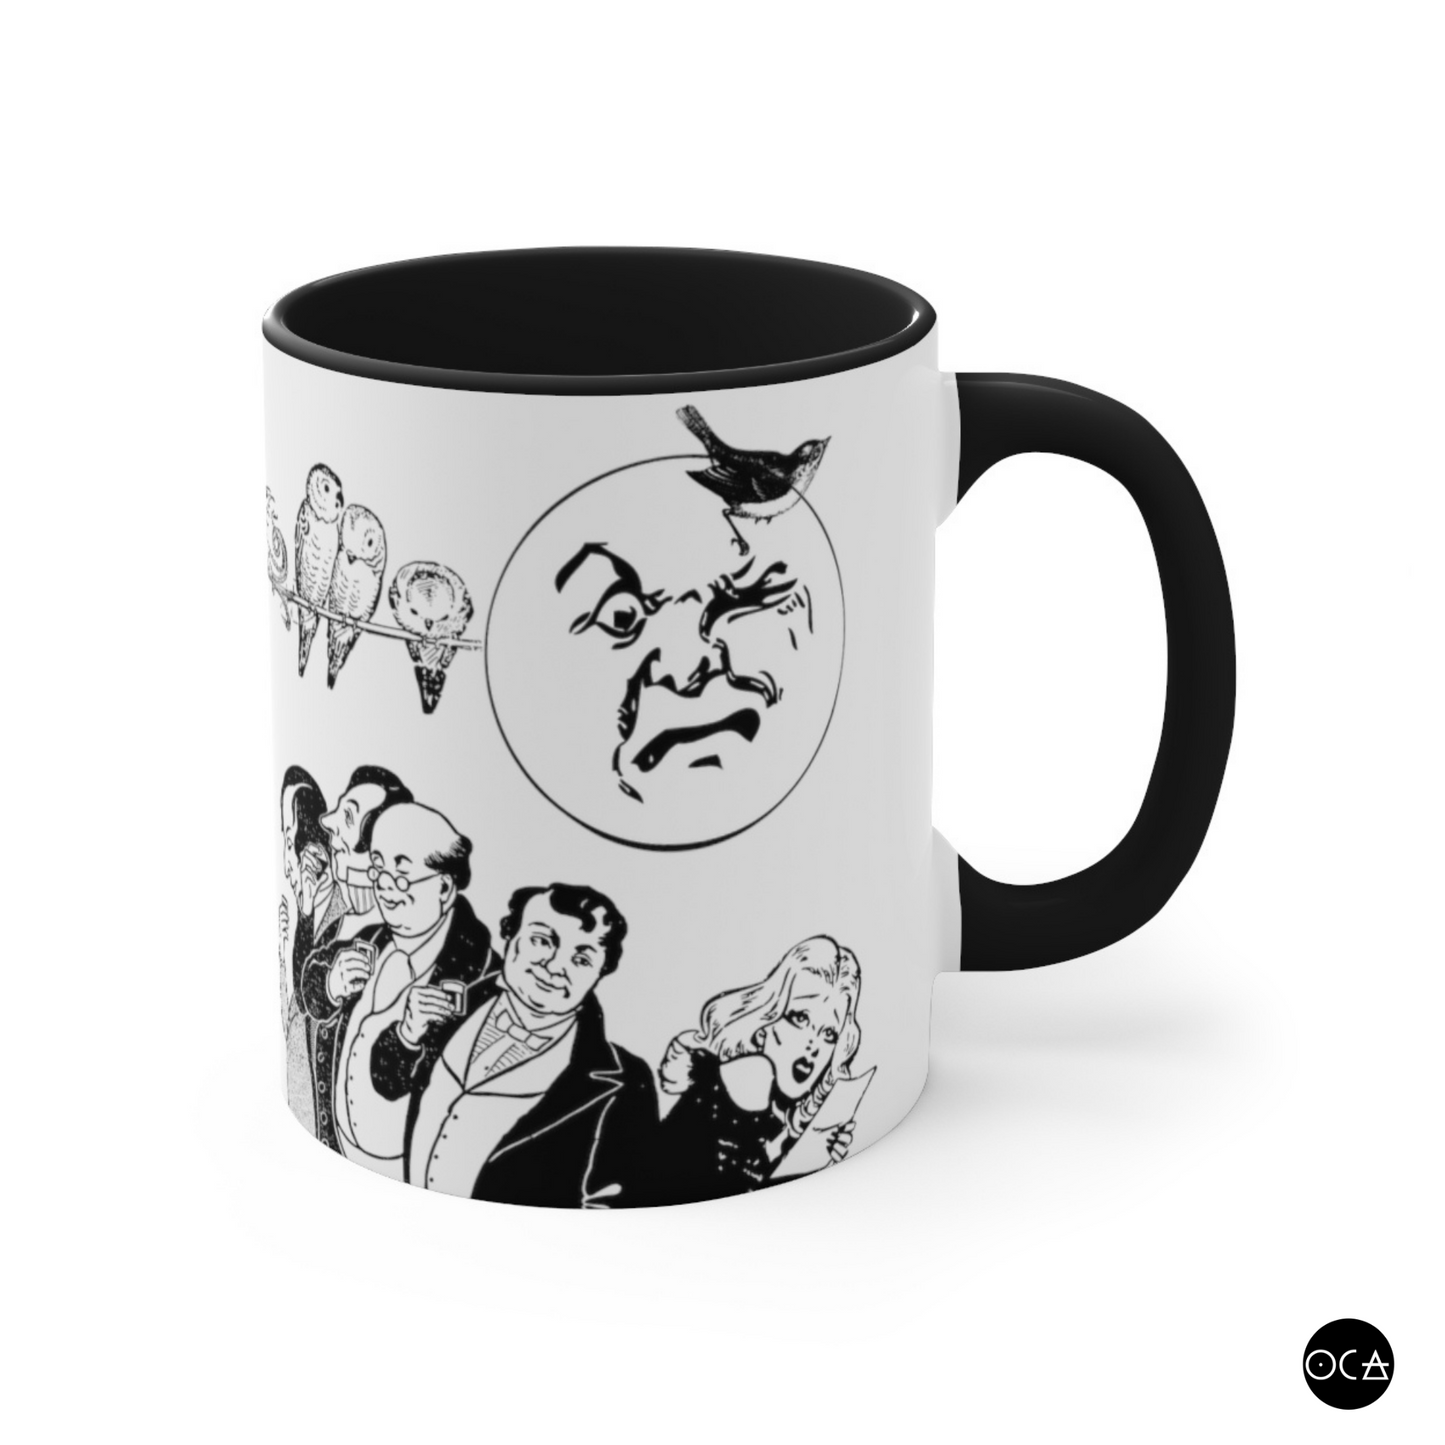 Tellatale Mug: The Nature of Consequence (2 Style Options)